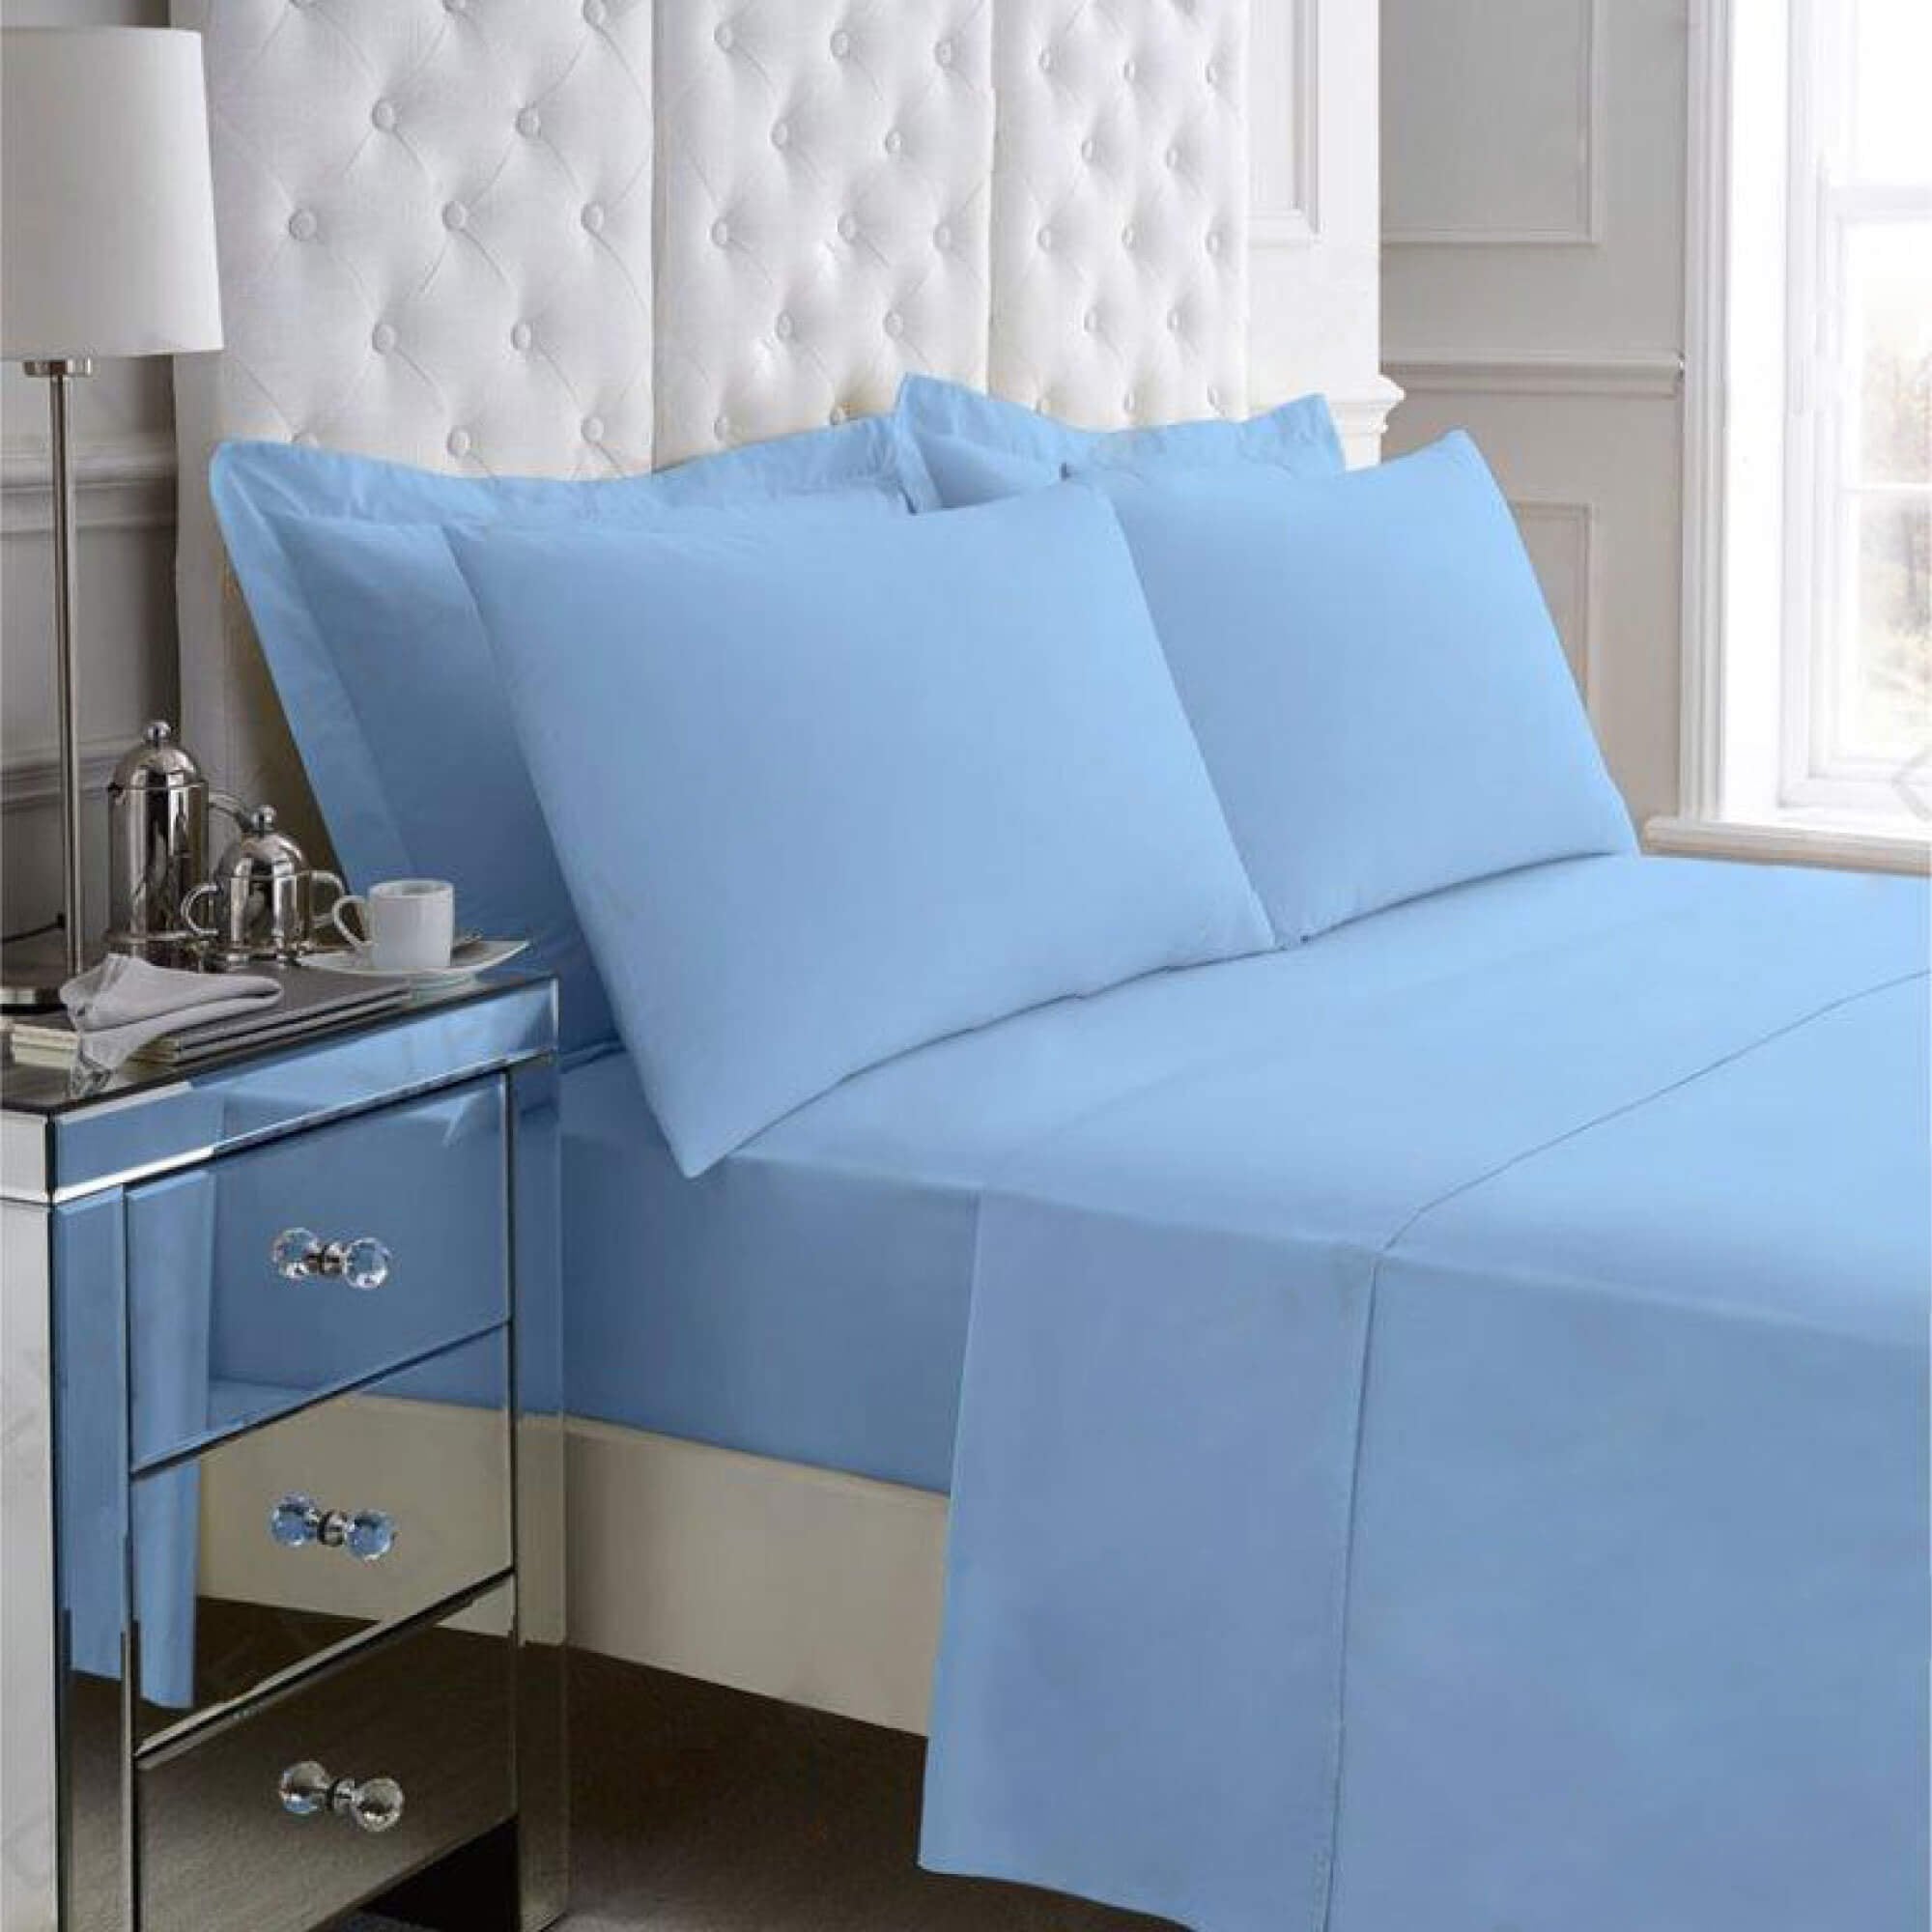 Non Iron Percale Bedding Sheet Range - Blue - King Fitted - TJ Hughes